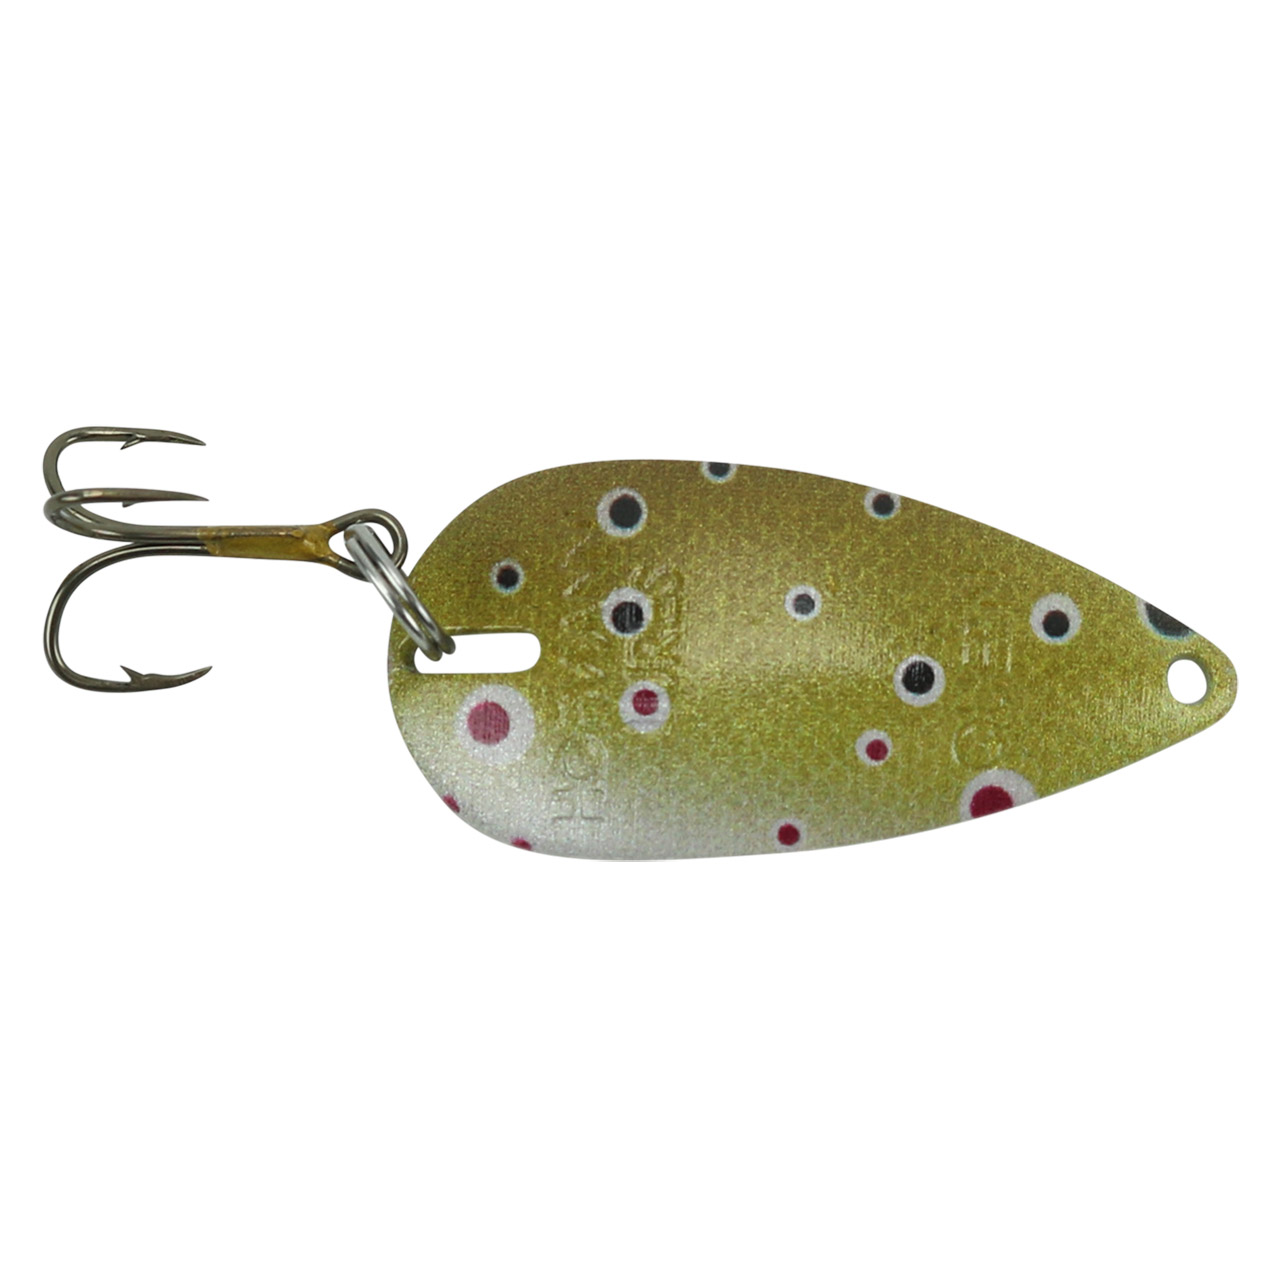 Hofmann's Lures Spinning Queen Spoon | Brook Trout; 1/4 oz. | FishUSA